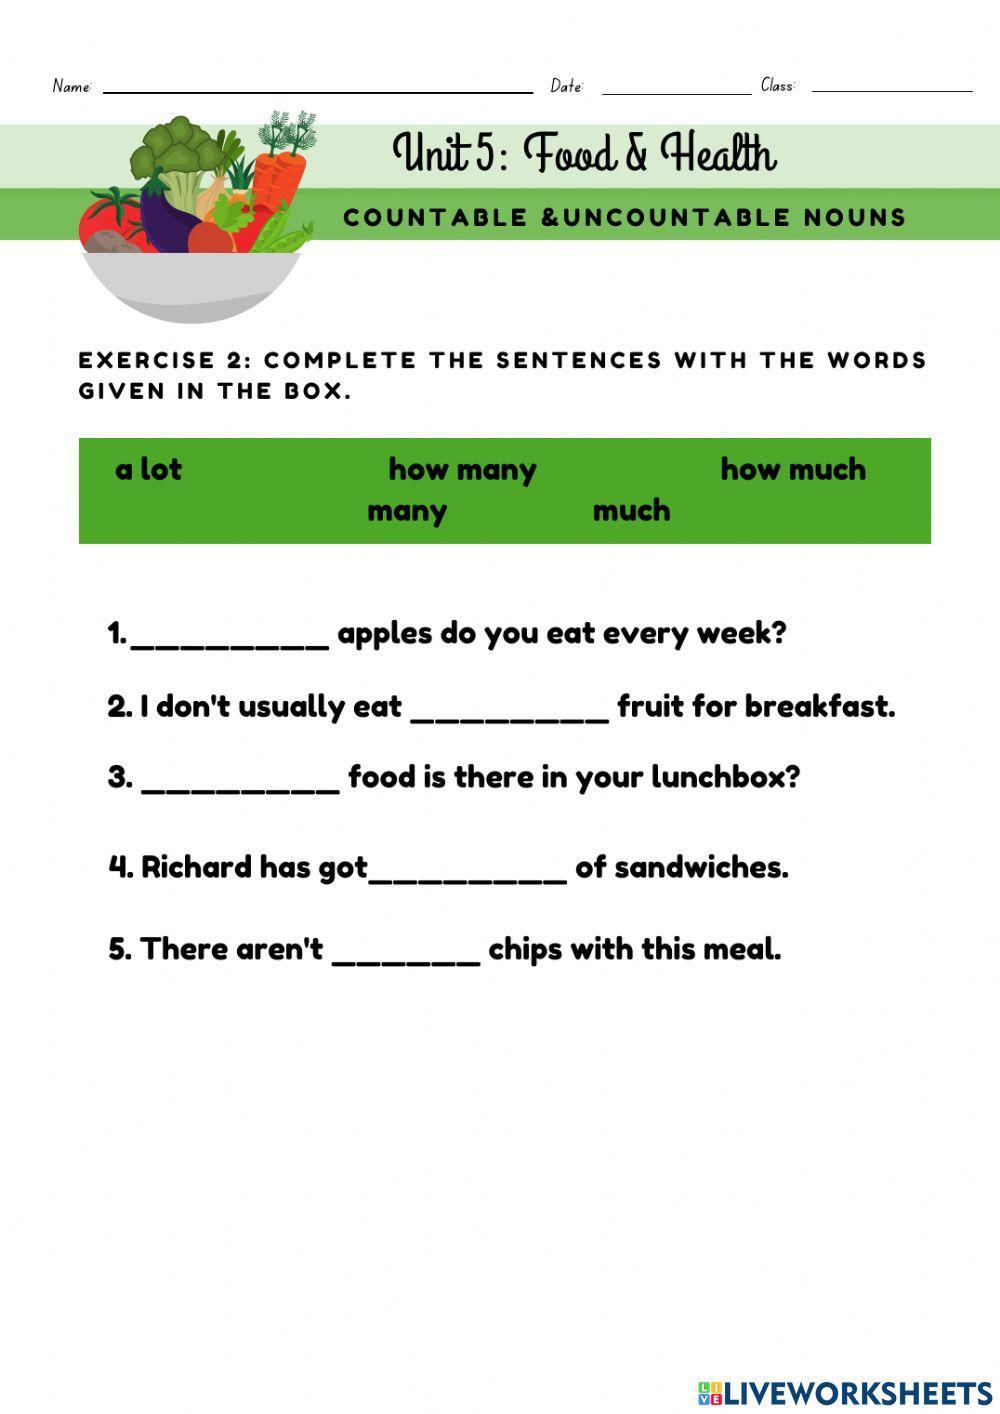 Unit 5 Food& Health (countable and countable nouns)